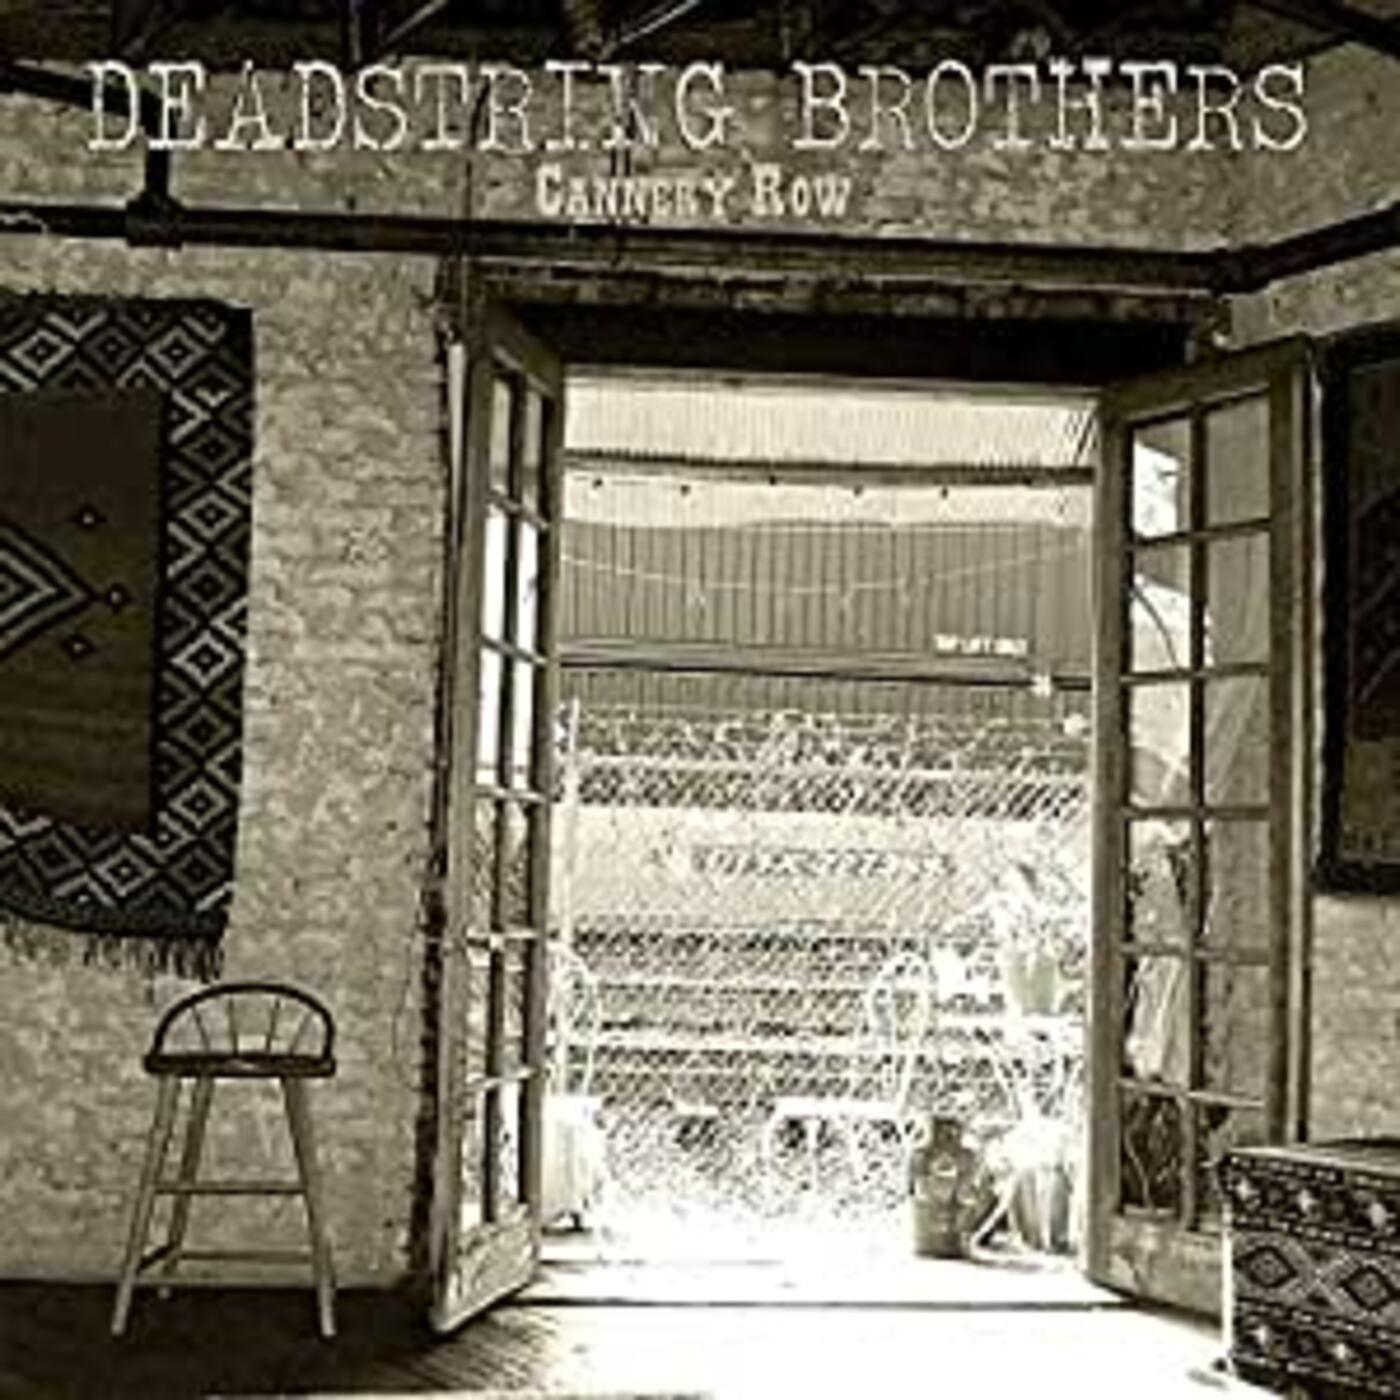 Deadstring Brothers | Cannery Row | Vinyl